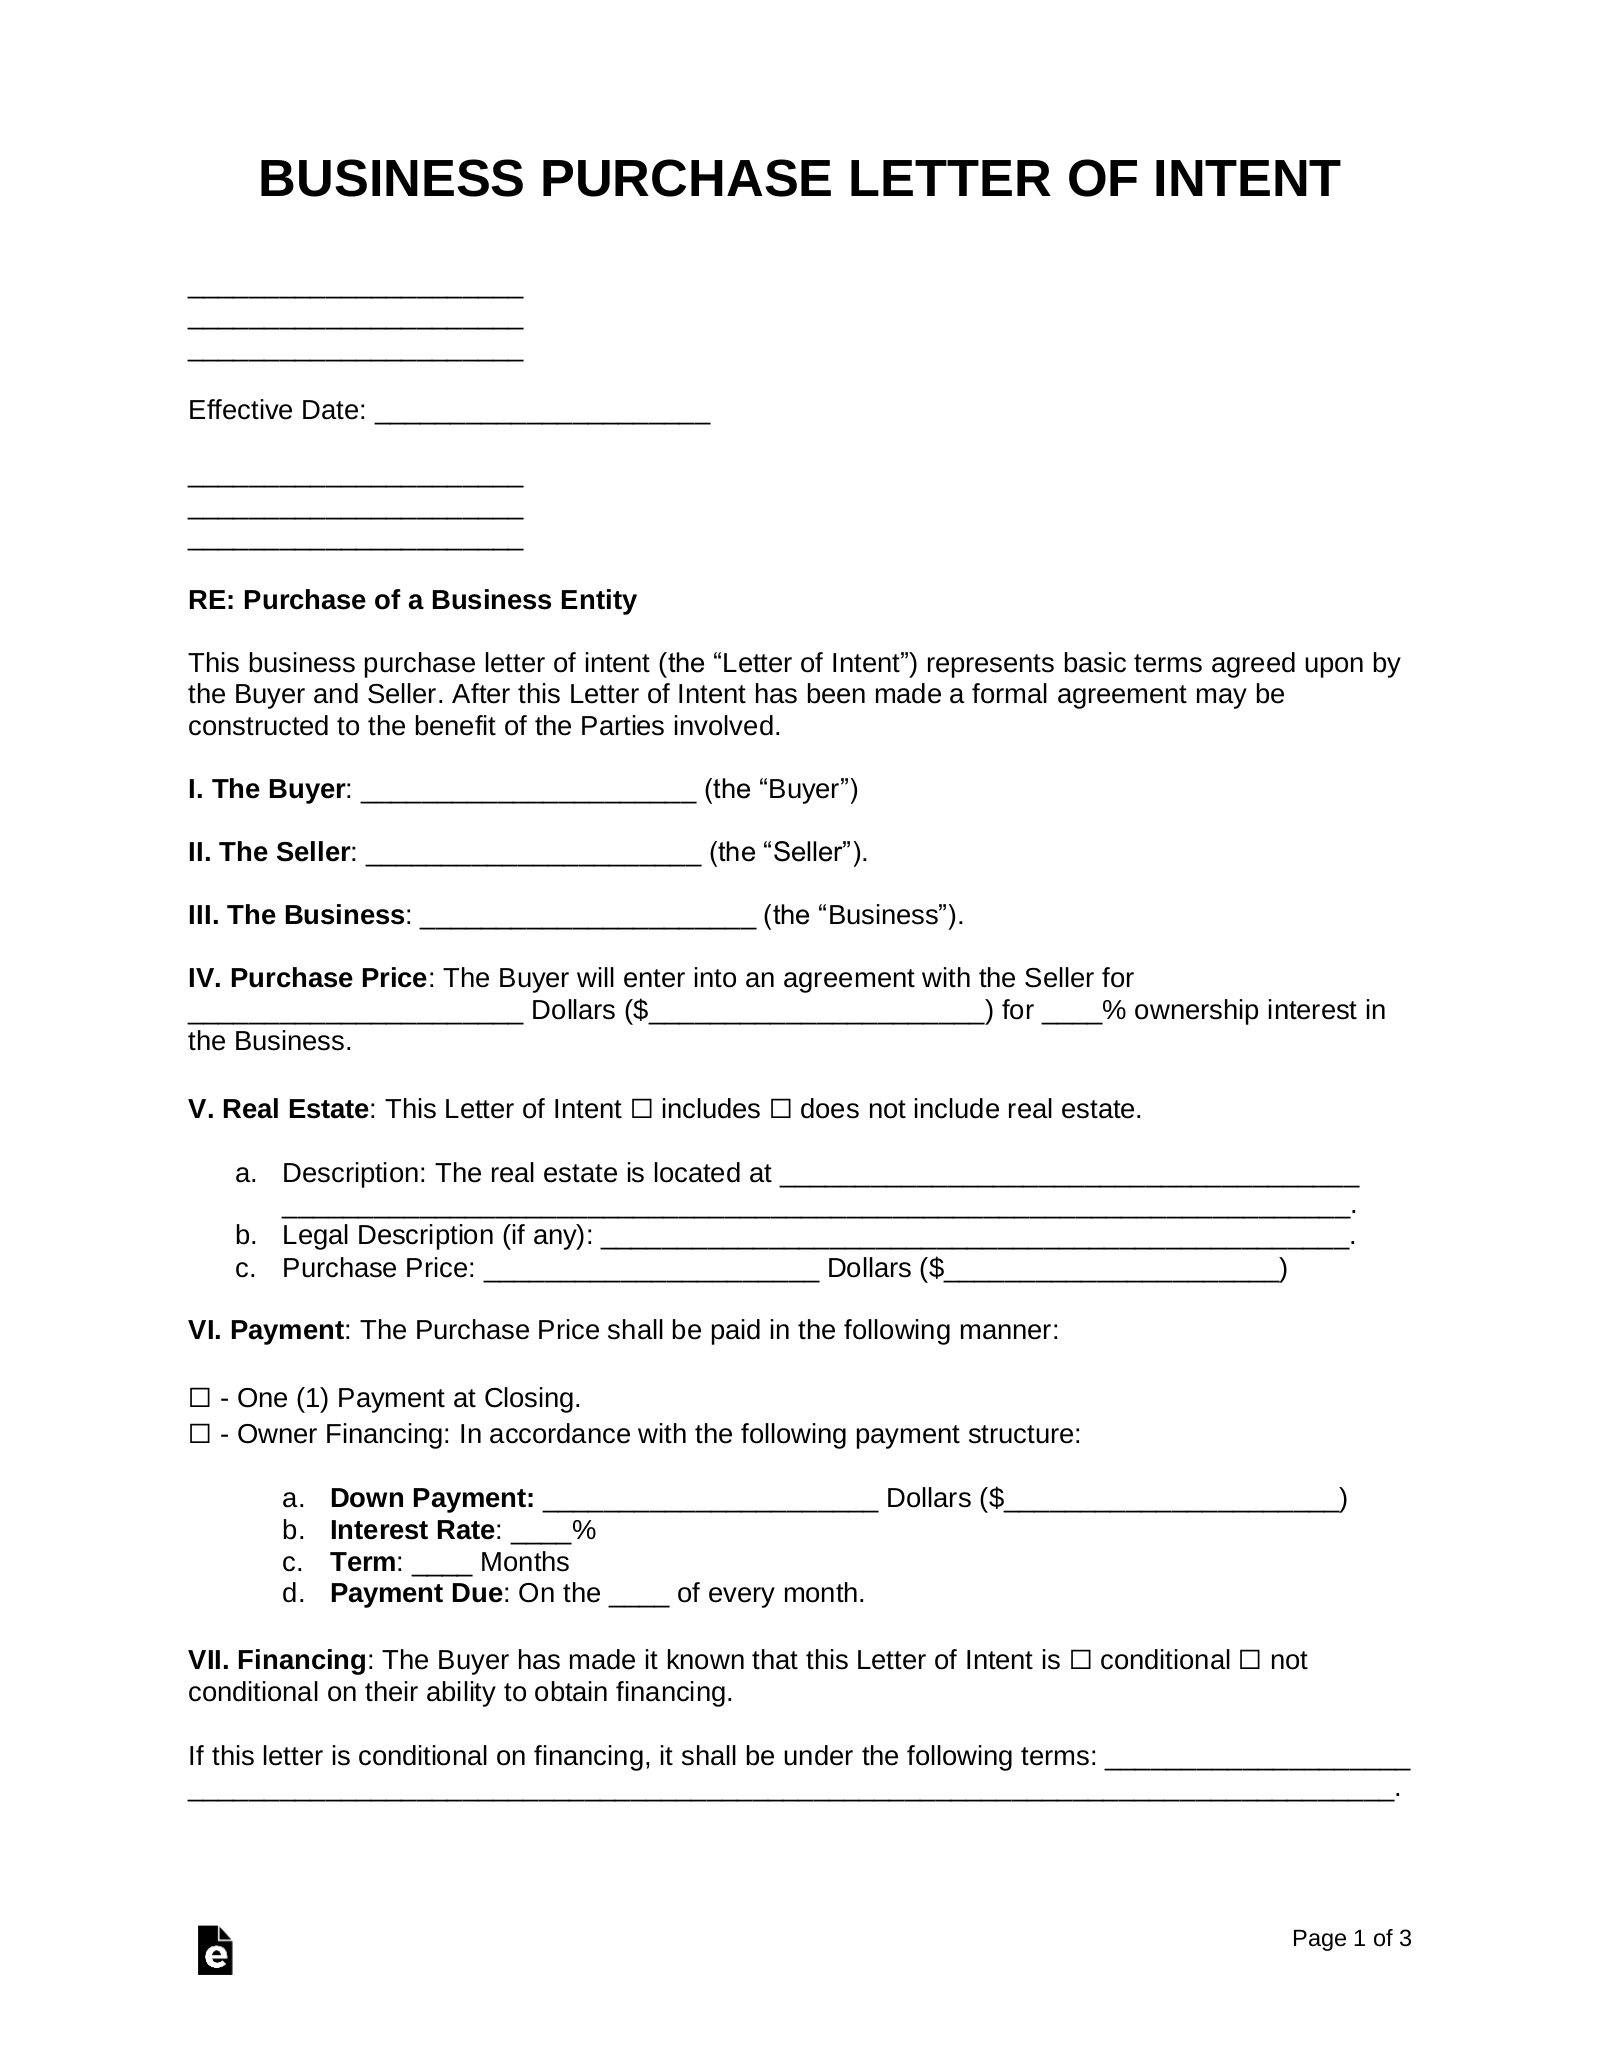 Free Business Purchase Letter Of Intent Template PDF Word EForms